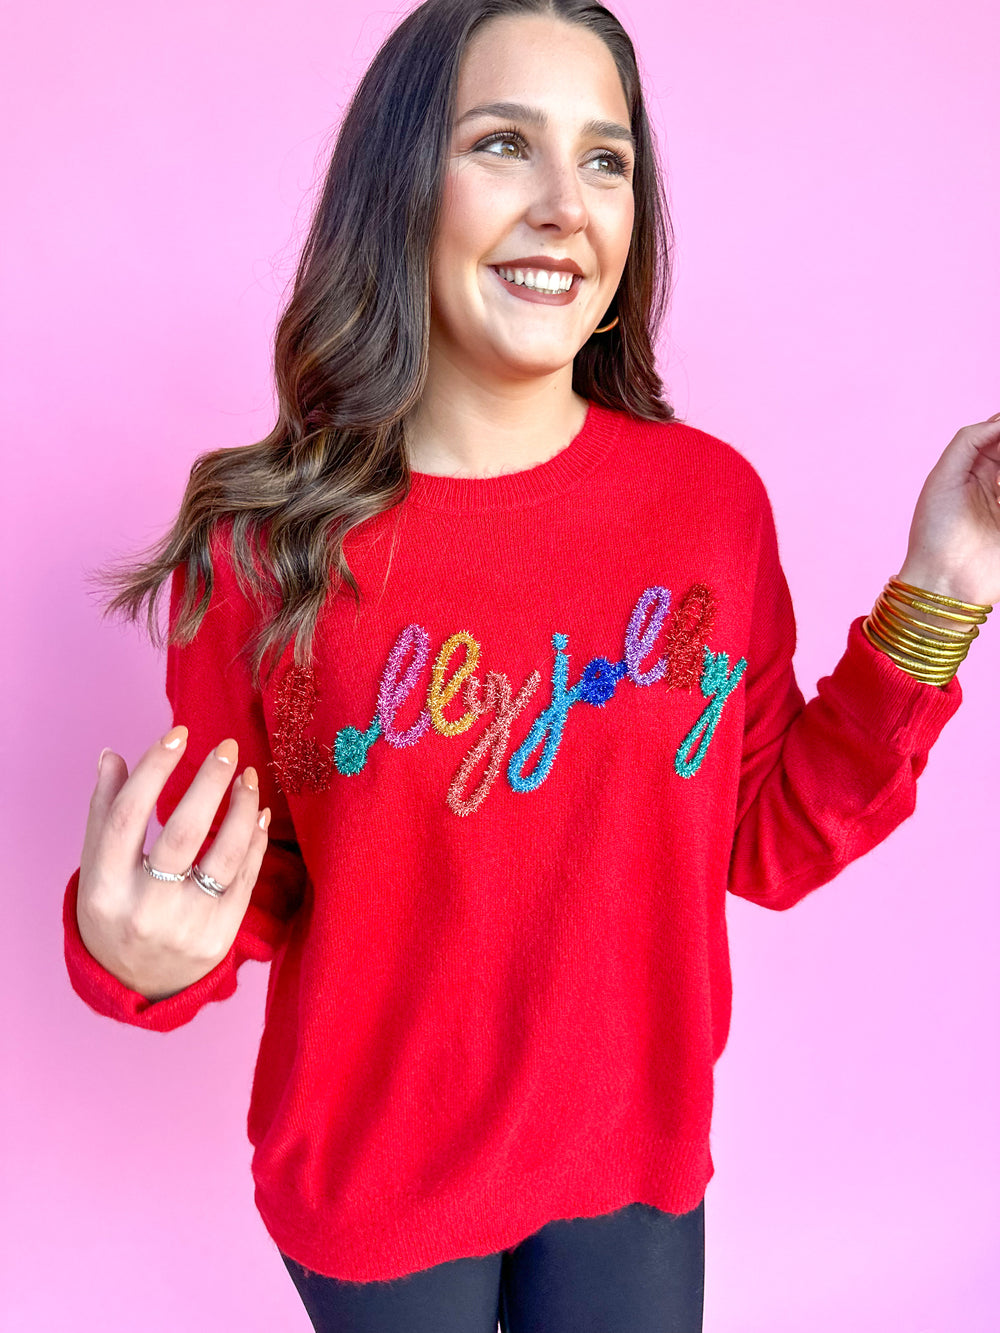 Tinsel Holly Jolly Sweater - Red